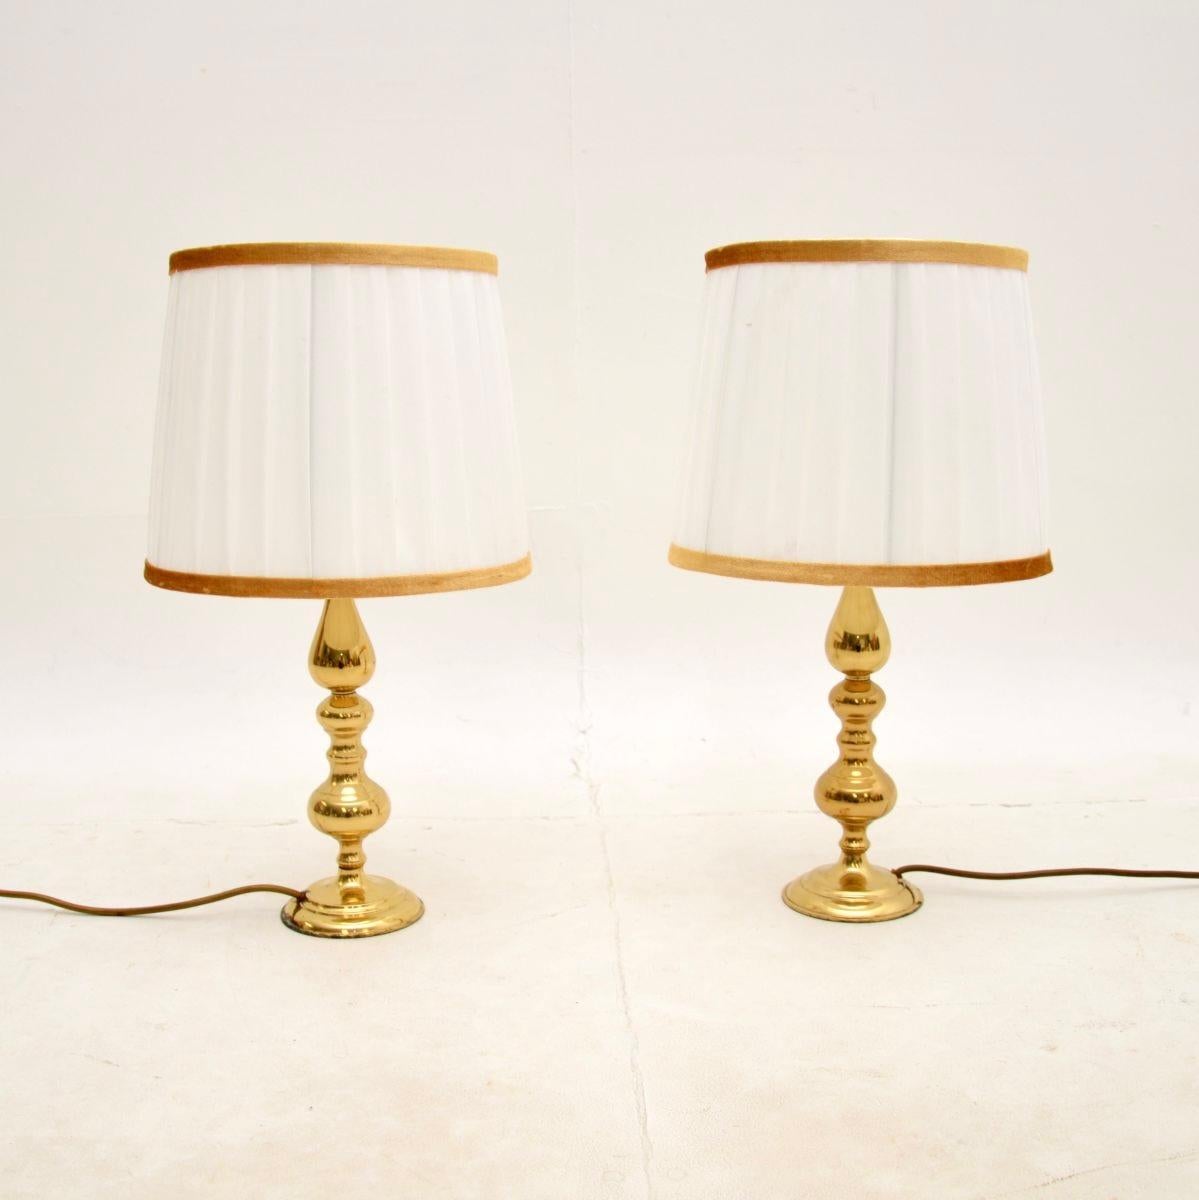 A lovely and very well made pair of vintage brass table lamps. They were made in England, they date from around the 1970’s.

The quality is excellent, they have a beautiful design and are a nice petite size, perfect for bedside lamps or use in a